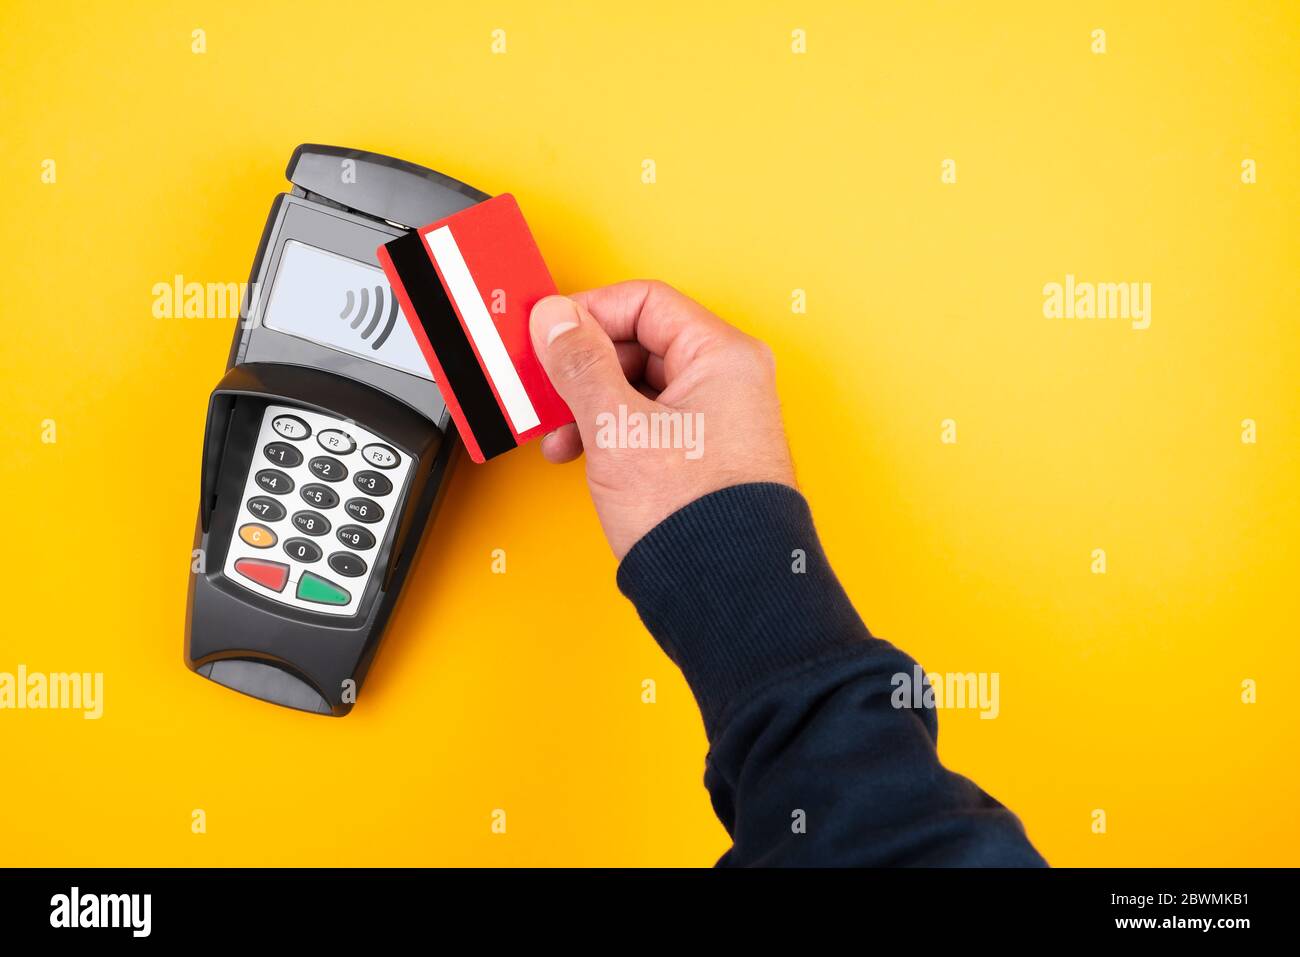 contactless payment concept, directly above view of person holding credit card or debit card against POS payment terminal on orange background Stock Photo